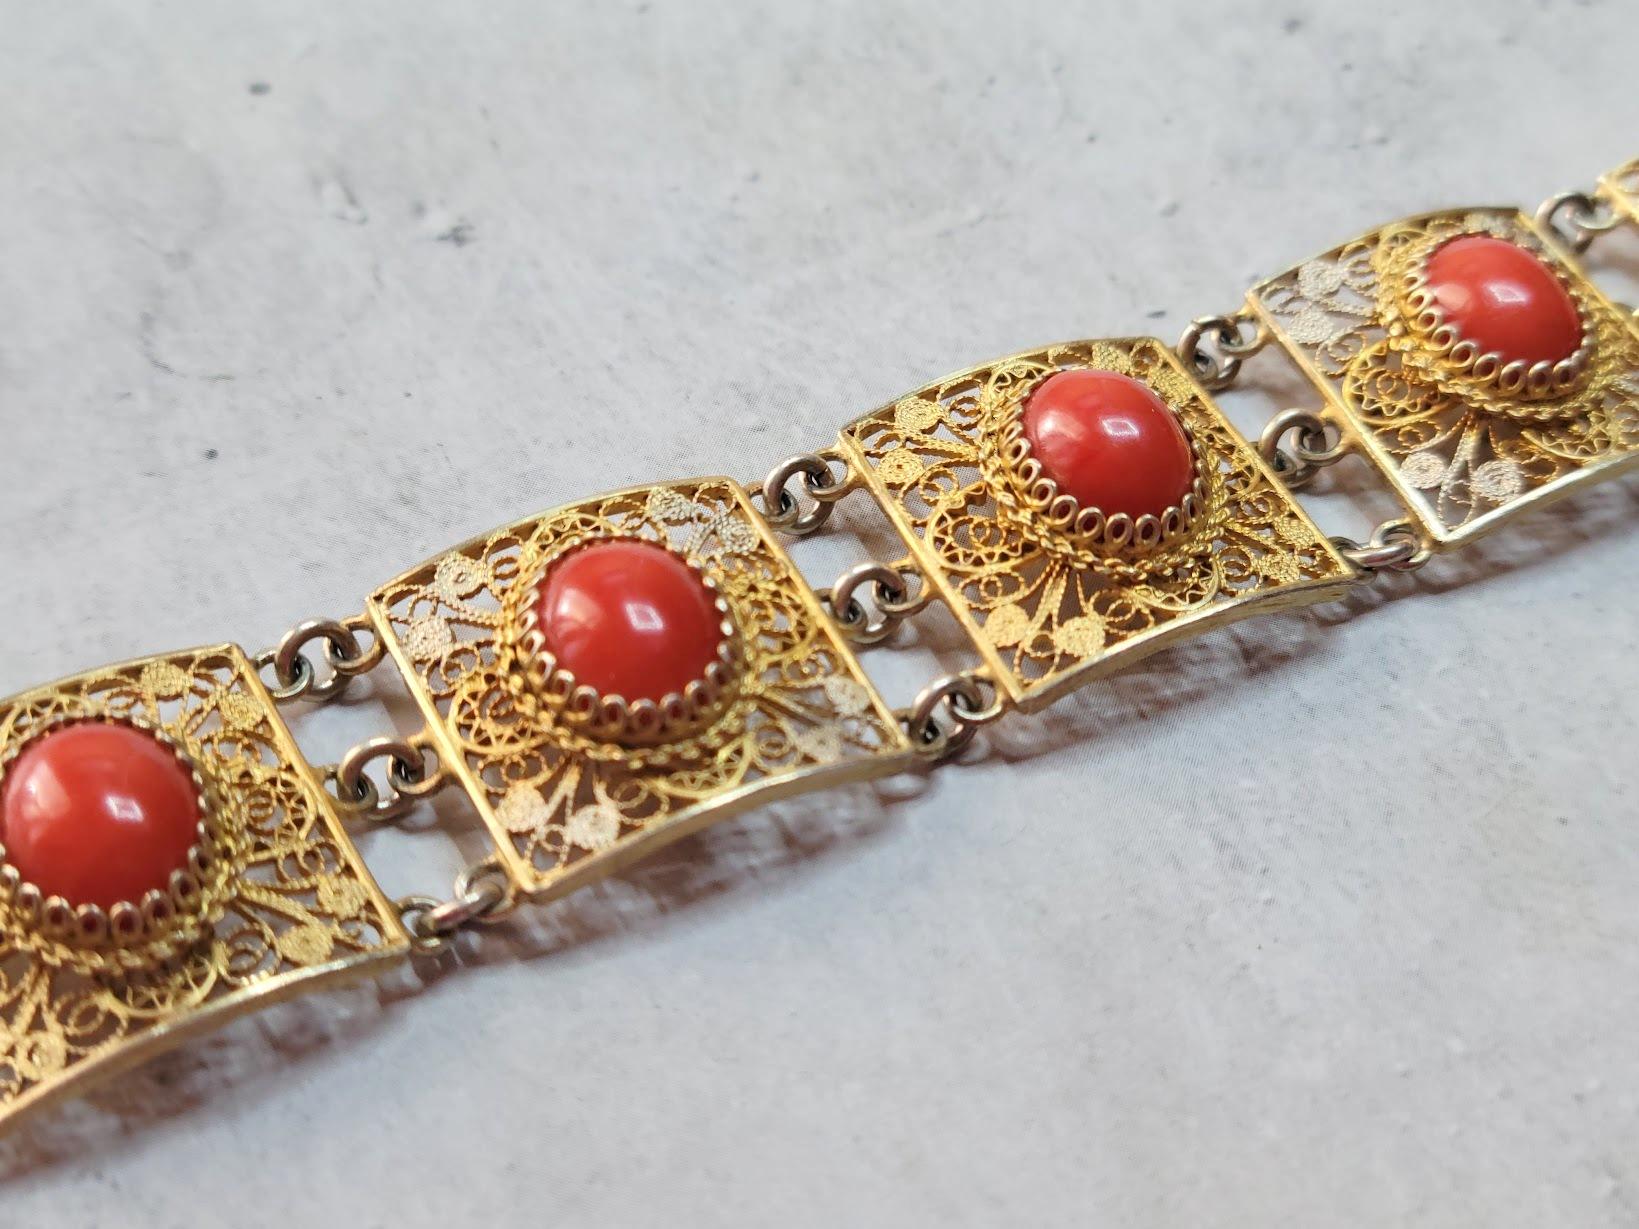 Introducing a stunning bracelet crafted from 800 silver filigree, gold-plated to perfection, adorned with four exquisite Mediterranean red coral cabochons. The 800 silver hallmark, prevalent in 19th and early 20th-century European craftsmanship,